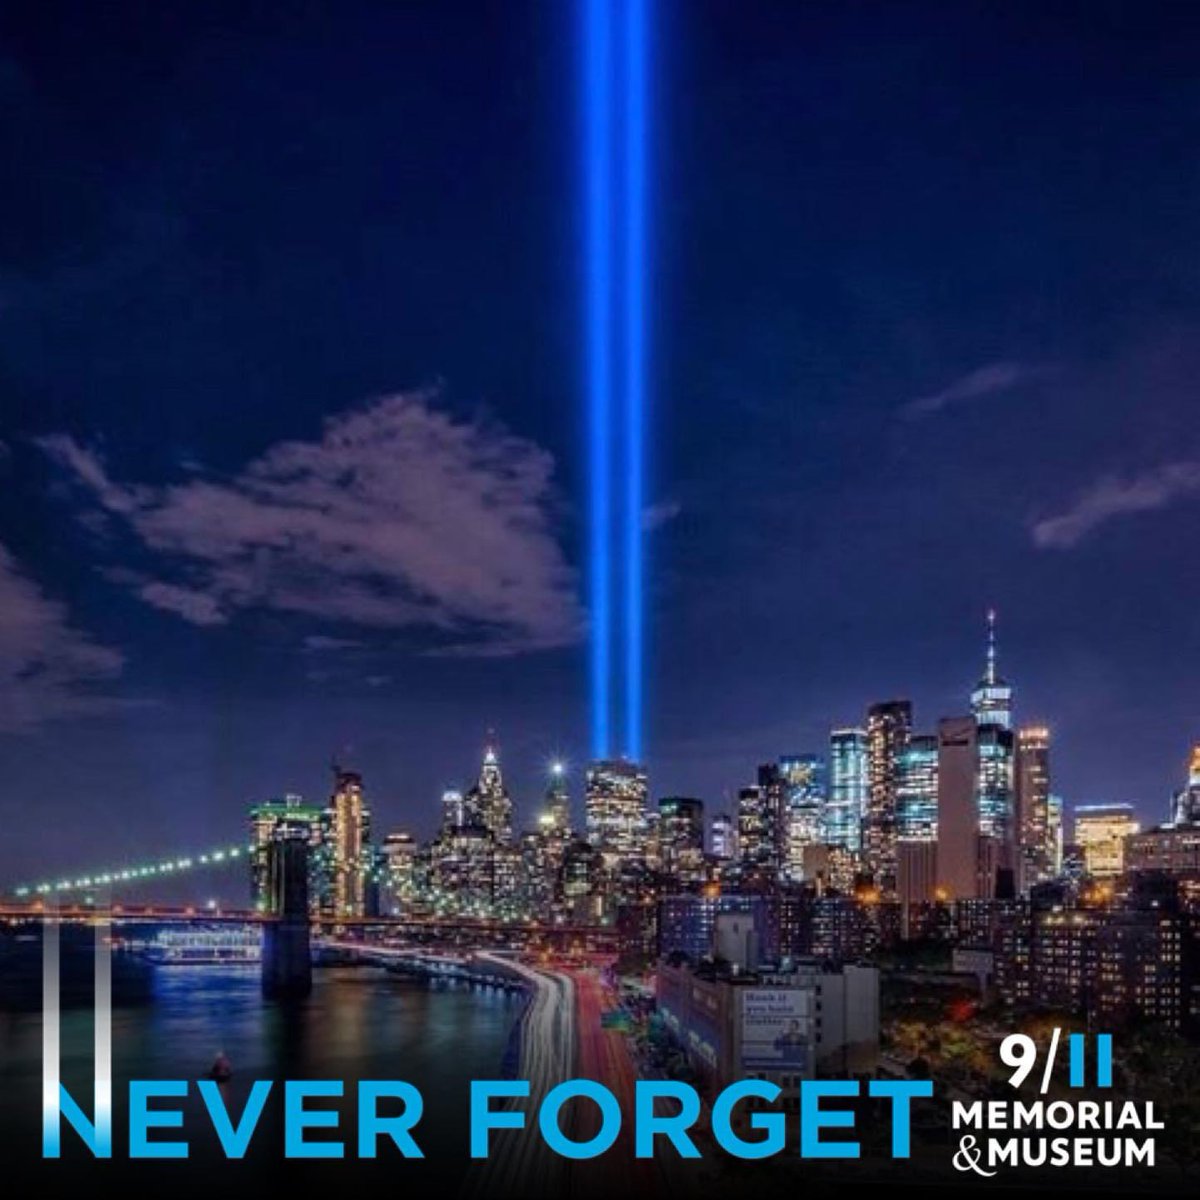 Remembering all the innocent lives lost and injured on this day twenty two years ago. Honoring the sacrifices of heroes who saved countless lives. We will never forget. #NeverForgetSept11 #Remembering911